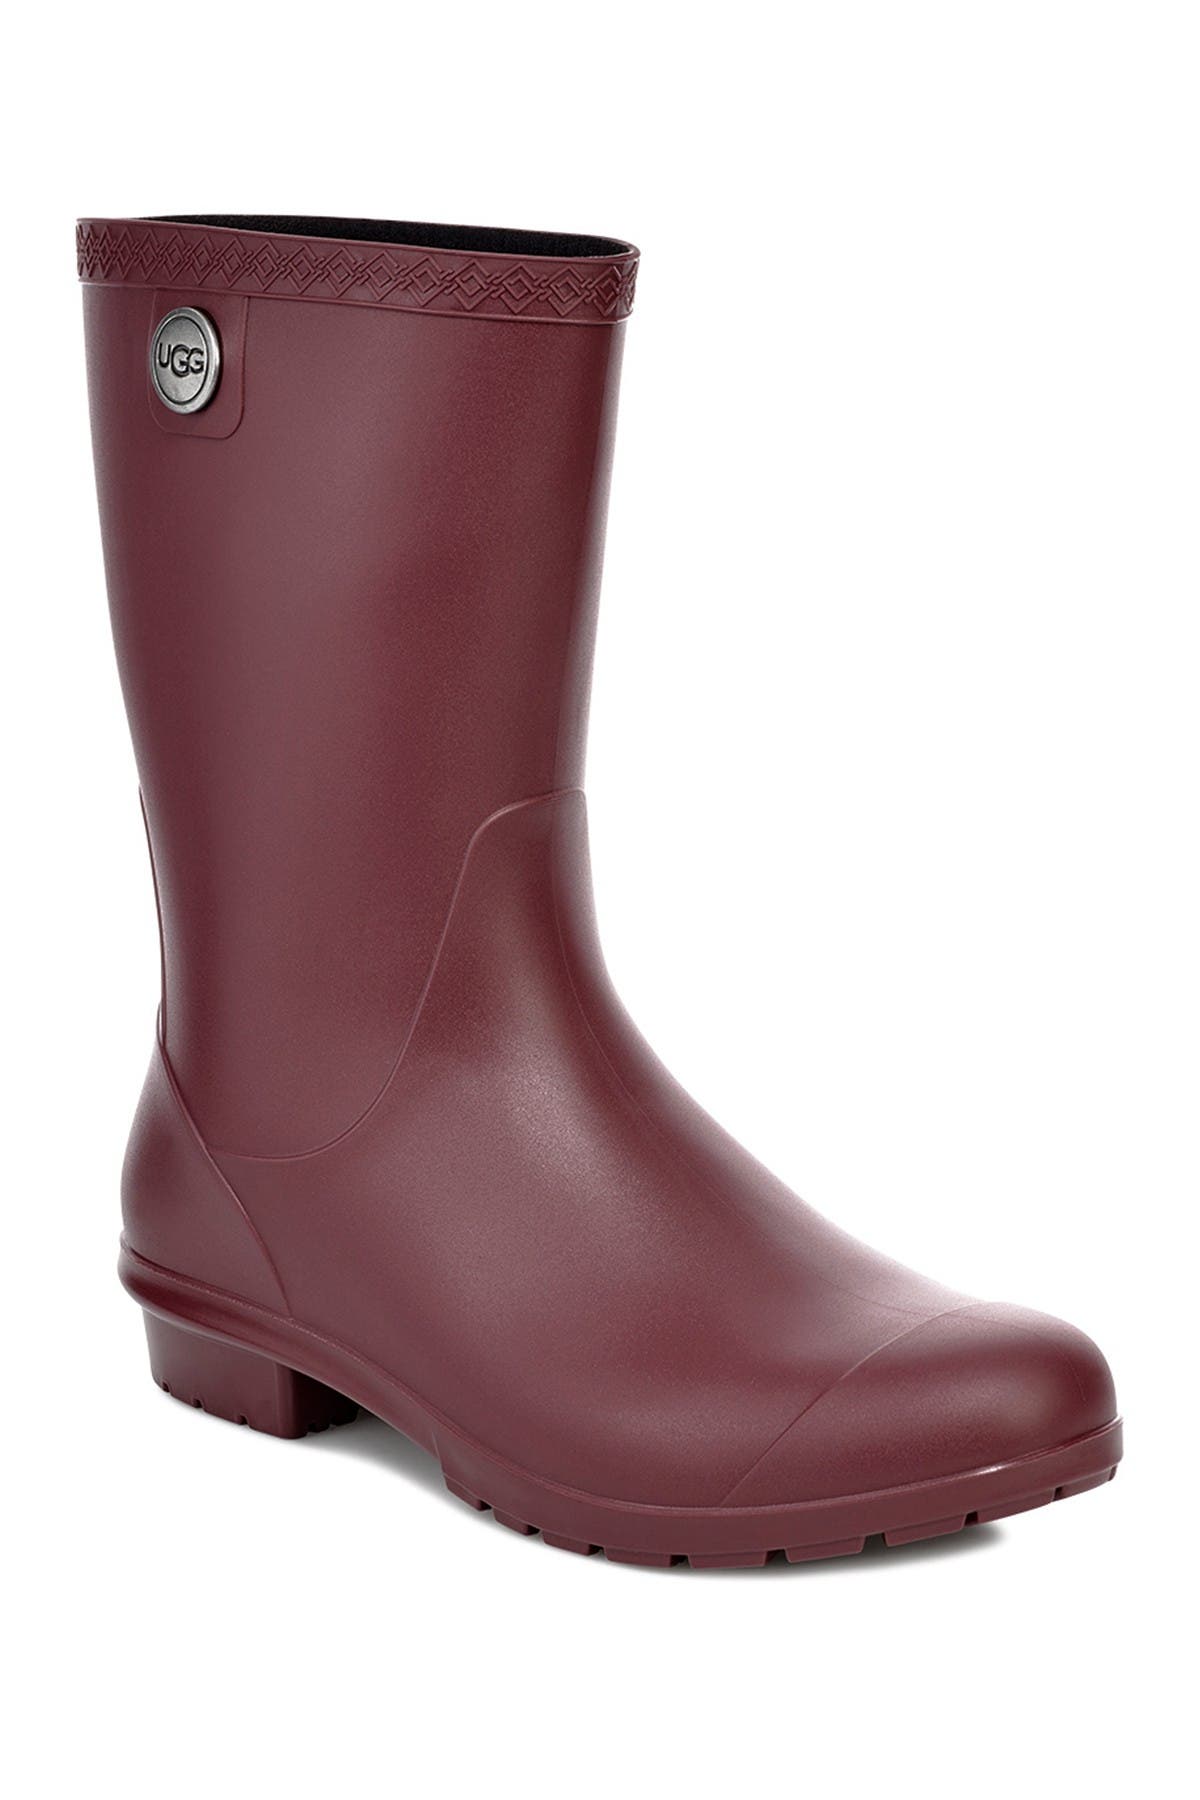 shearling lined rain boots